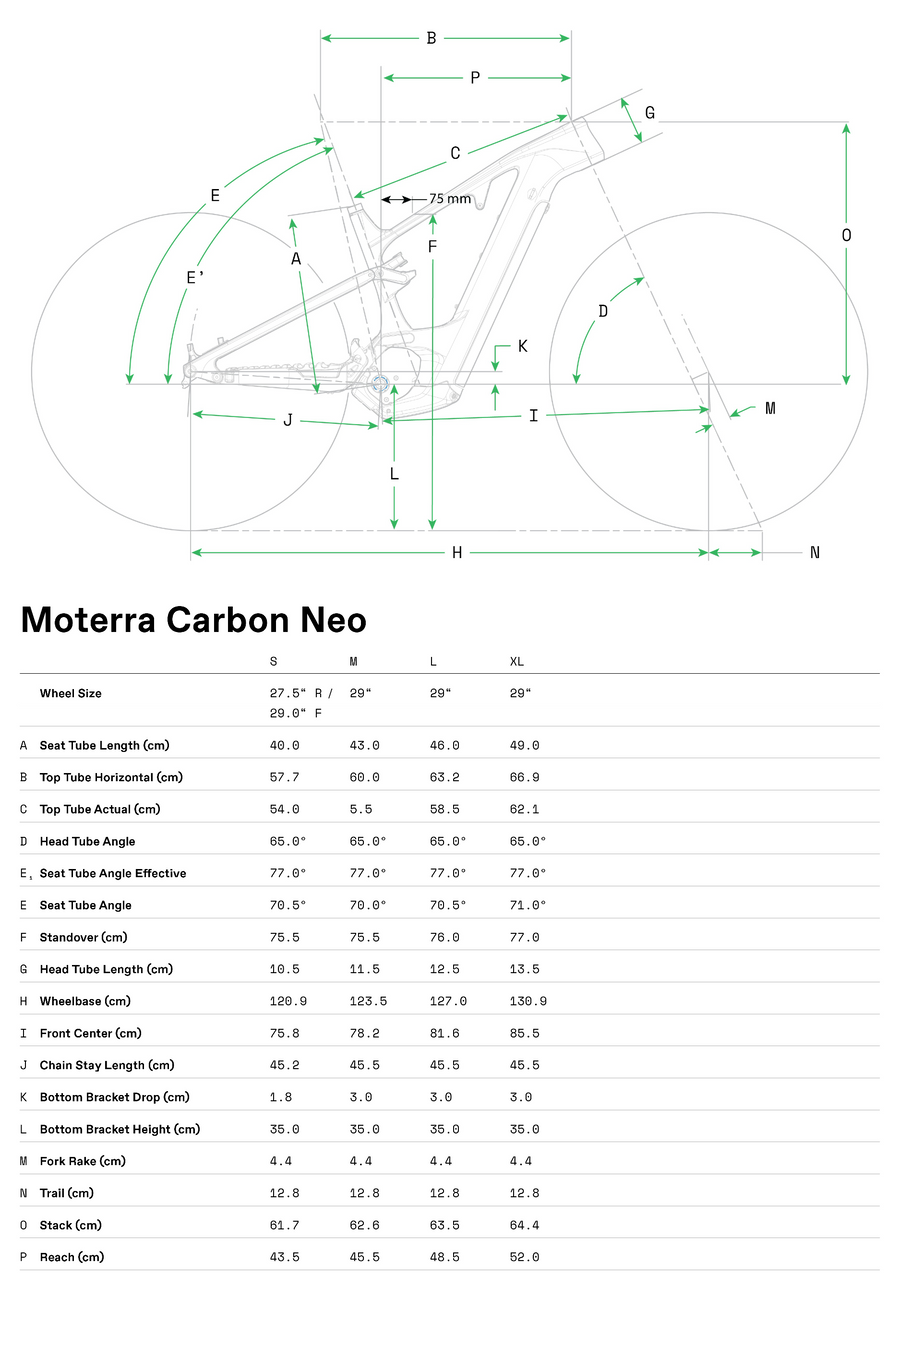 cannondale-moterra-neo-carbon-1-e-bike-abyss-bluecannondale-moterra-neo-carbon-2-e-mtb-bike-mantiscannondale-moterra-neo-carbon-2-e-mtb-bike-highlighter-pre-ordercannondale-moterra-neo-3-e-mtb-bike-mercury-pre-order